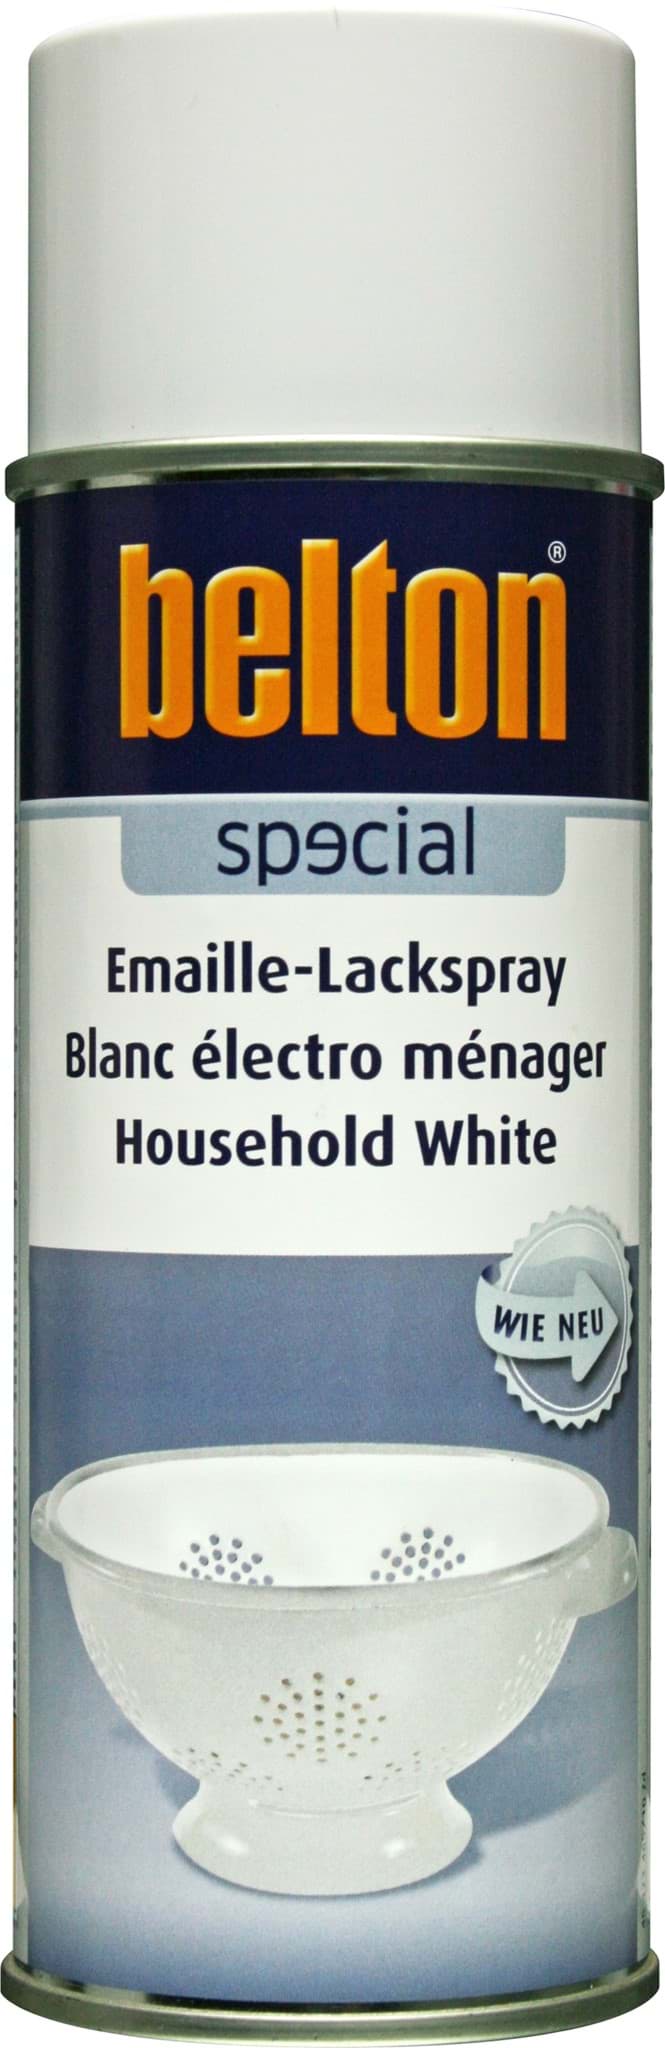 Picture of Belton special Emaille-Lackspray weiß